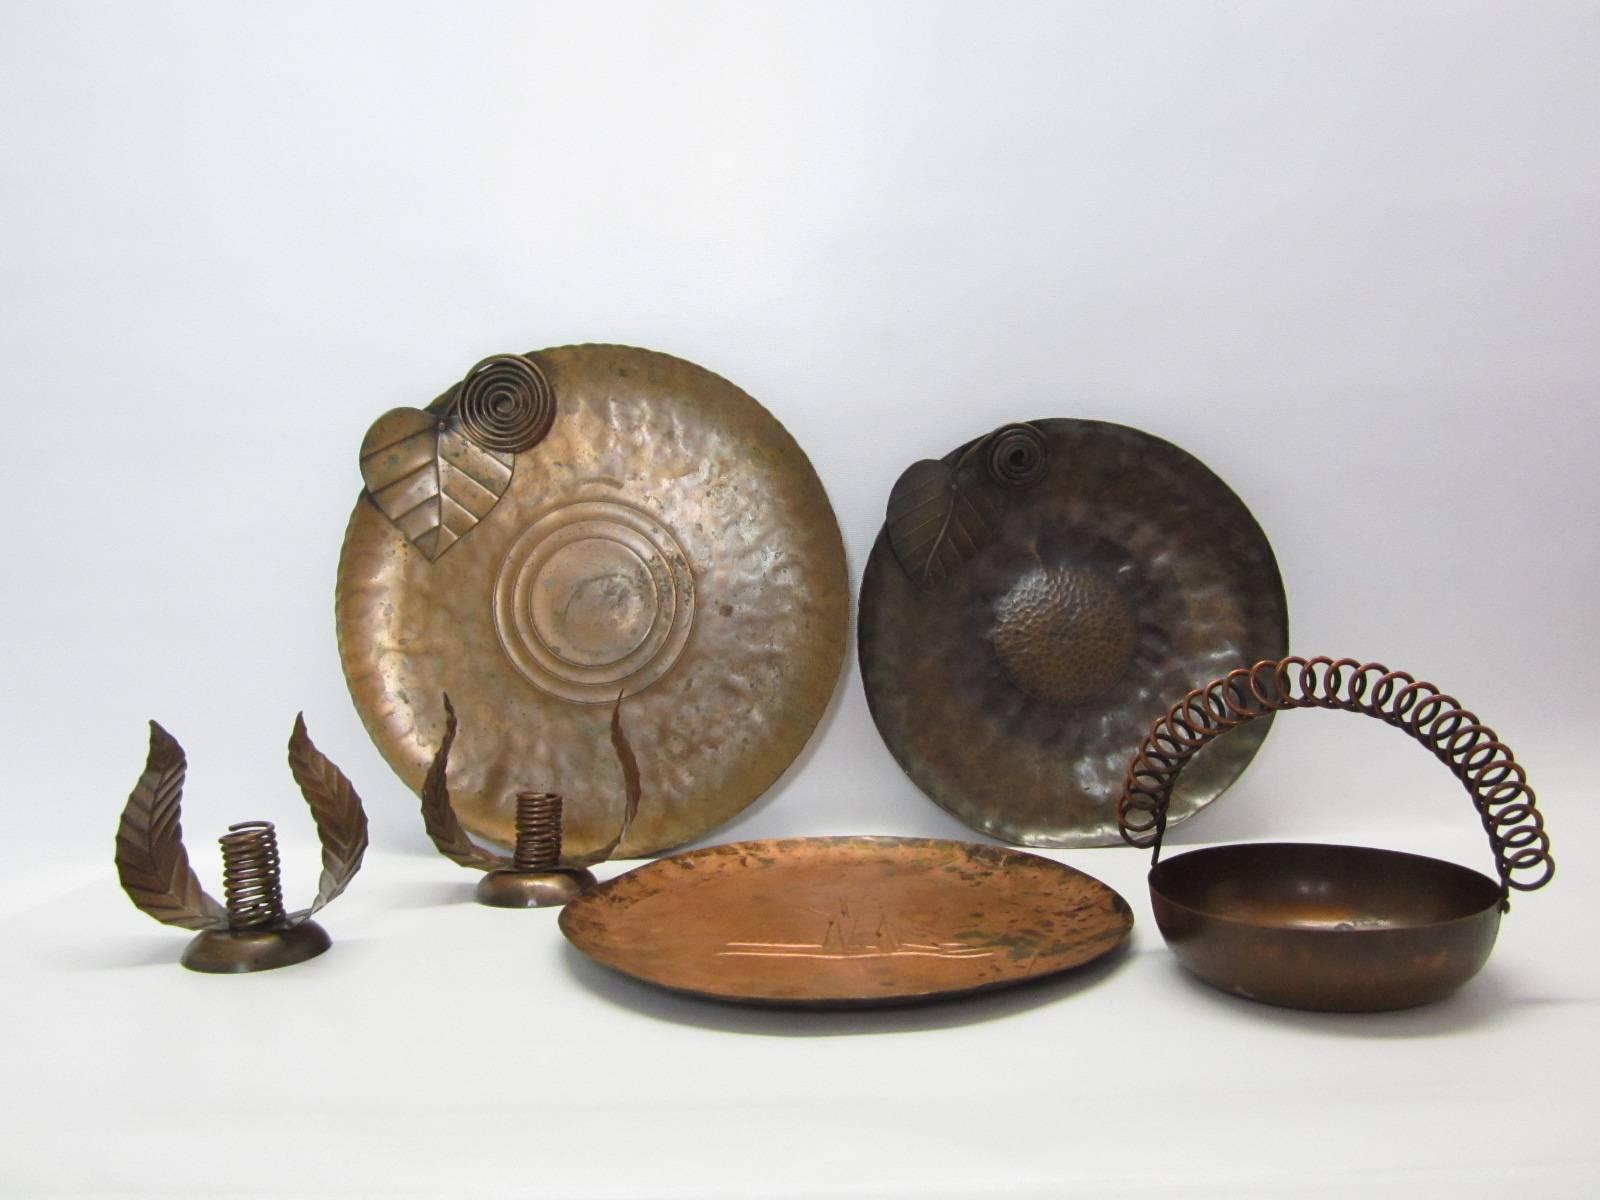 Grouping of hand-hammered and hand-wrought decorative pieces from a master jewelry and house wares artist and designer. Group consists of large platter with leaf and coil design, smaller leaf and coil plate, plate with hammered ship motif, bowl with